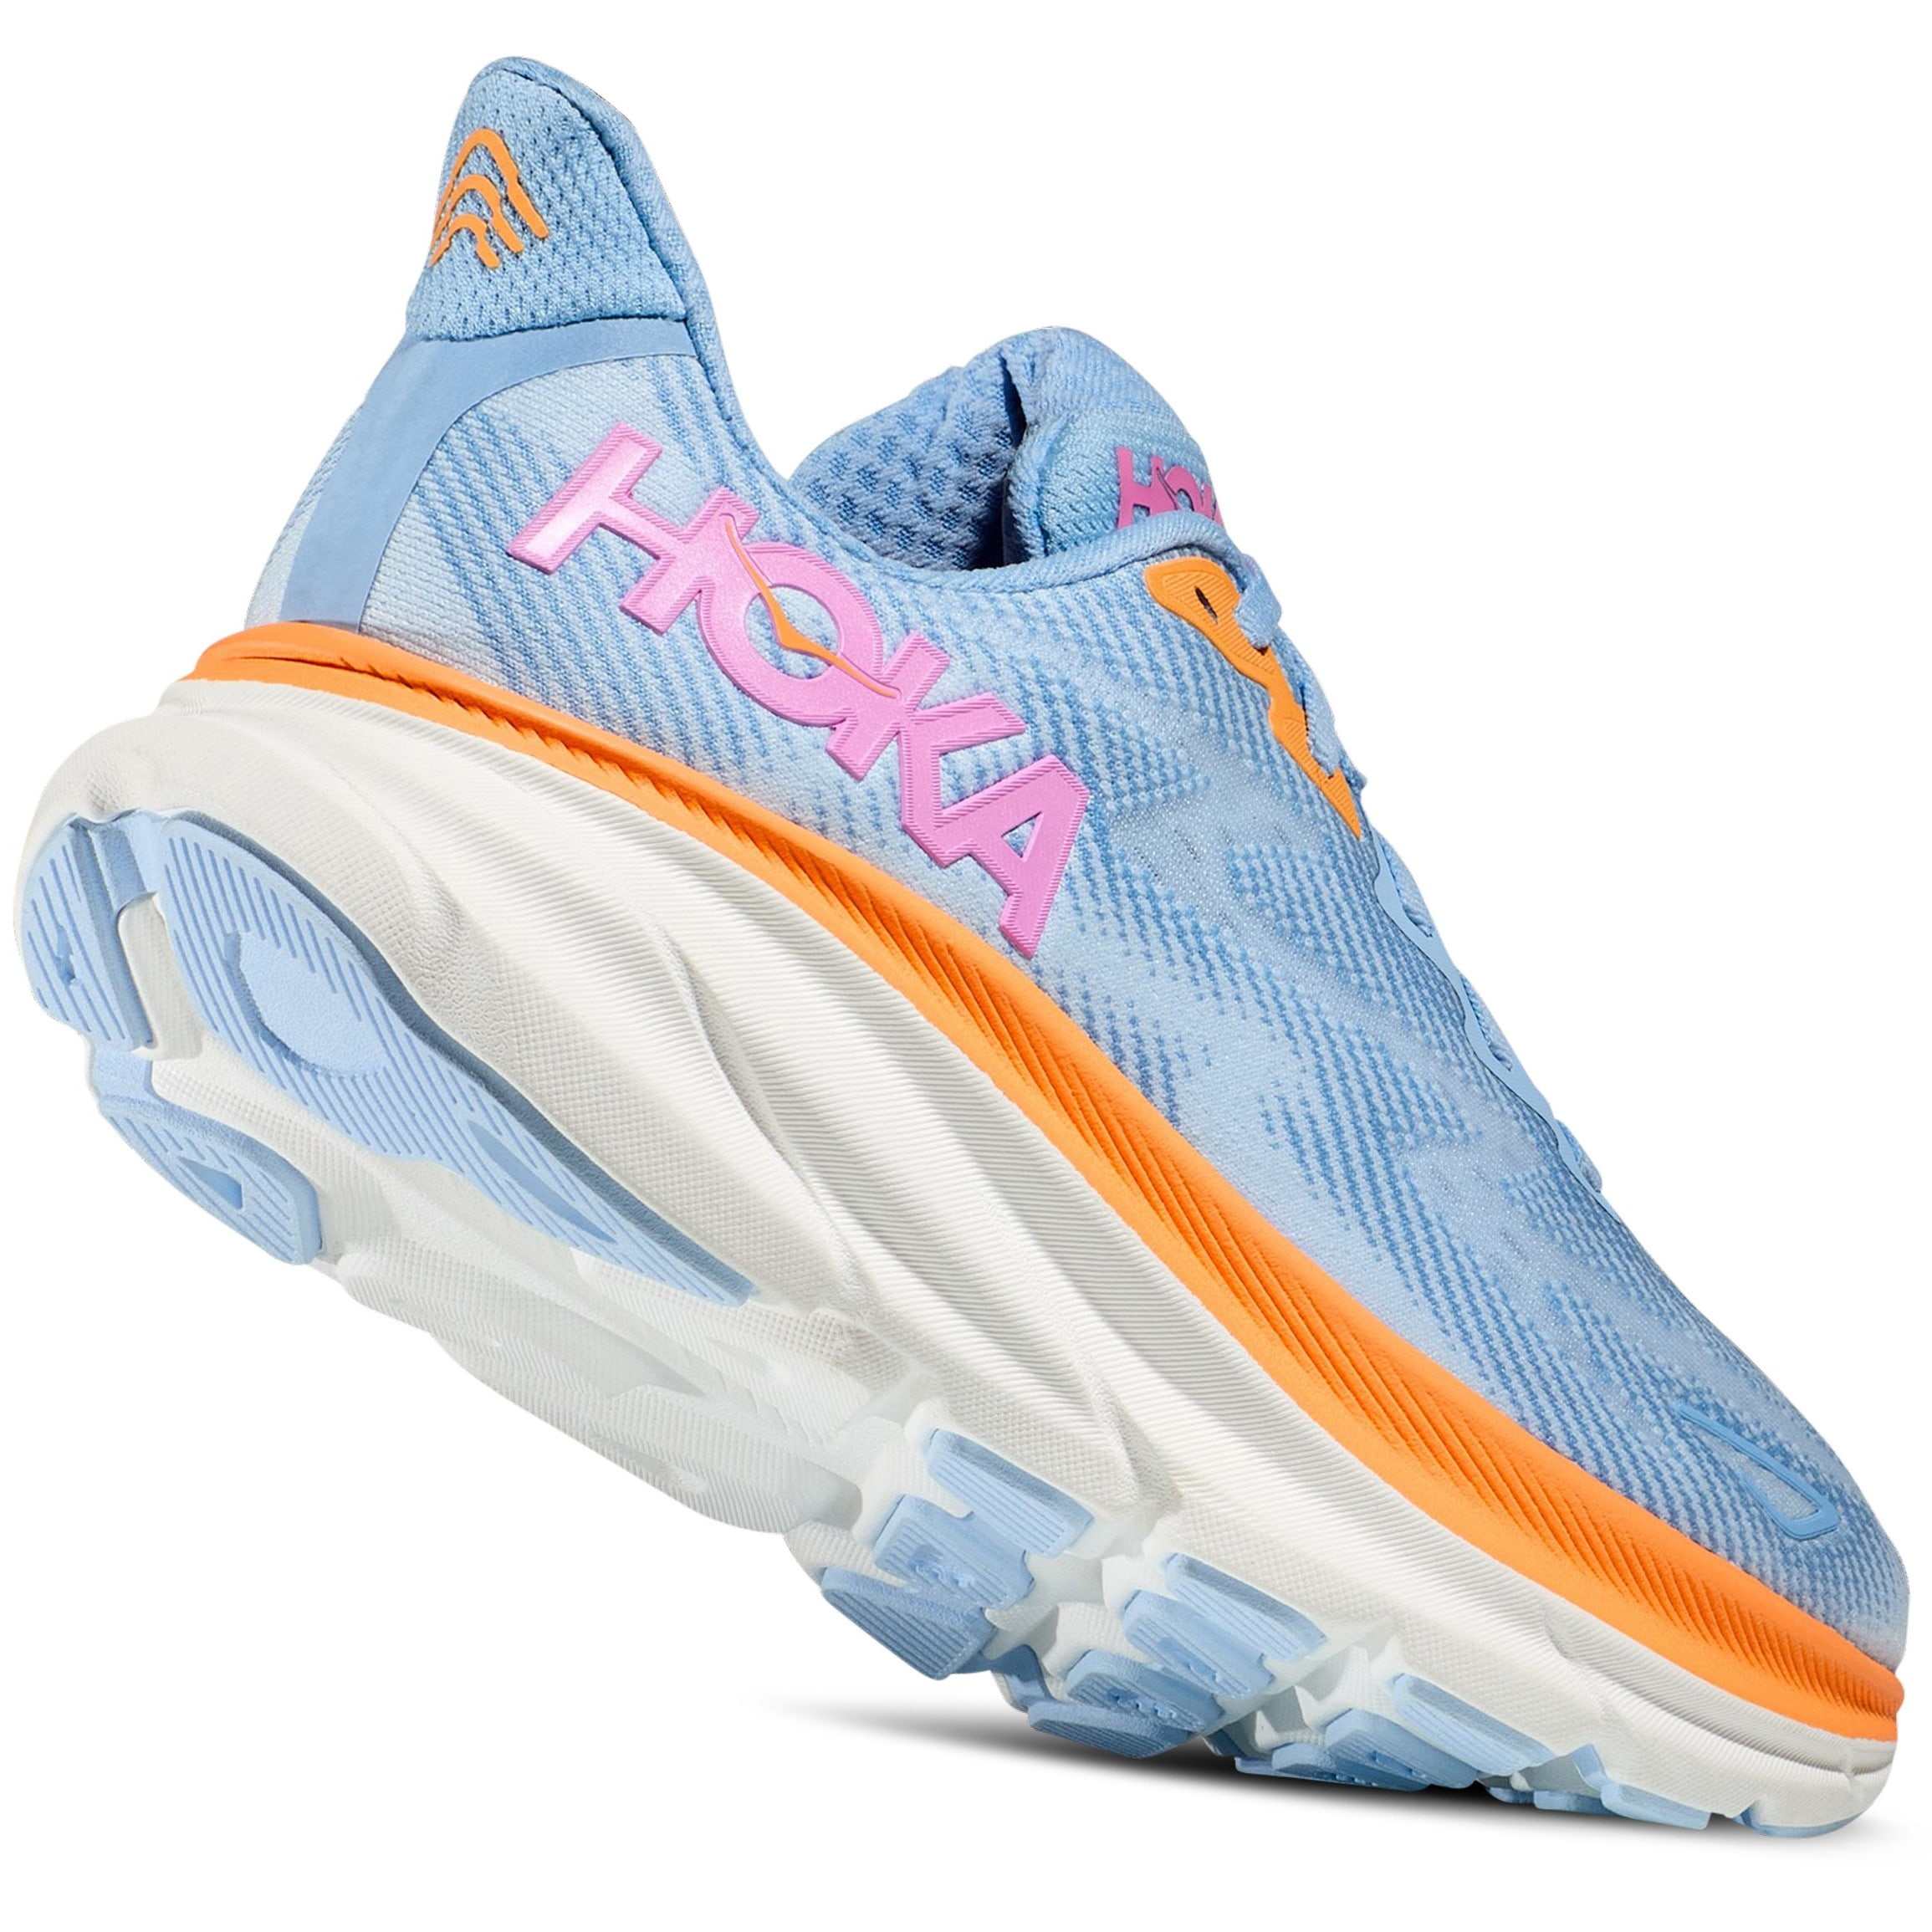 GIÀY HOKA NỮ CLIFTON 9 AIRY BLUE ICE WATER WOMEN ROAD RUNNING SHOES 1127896-ABIW 13